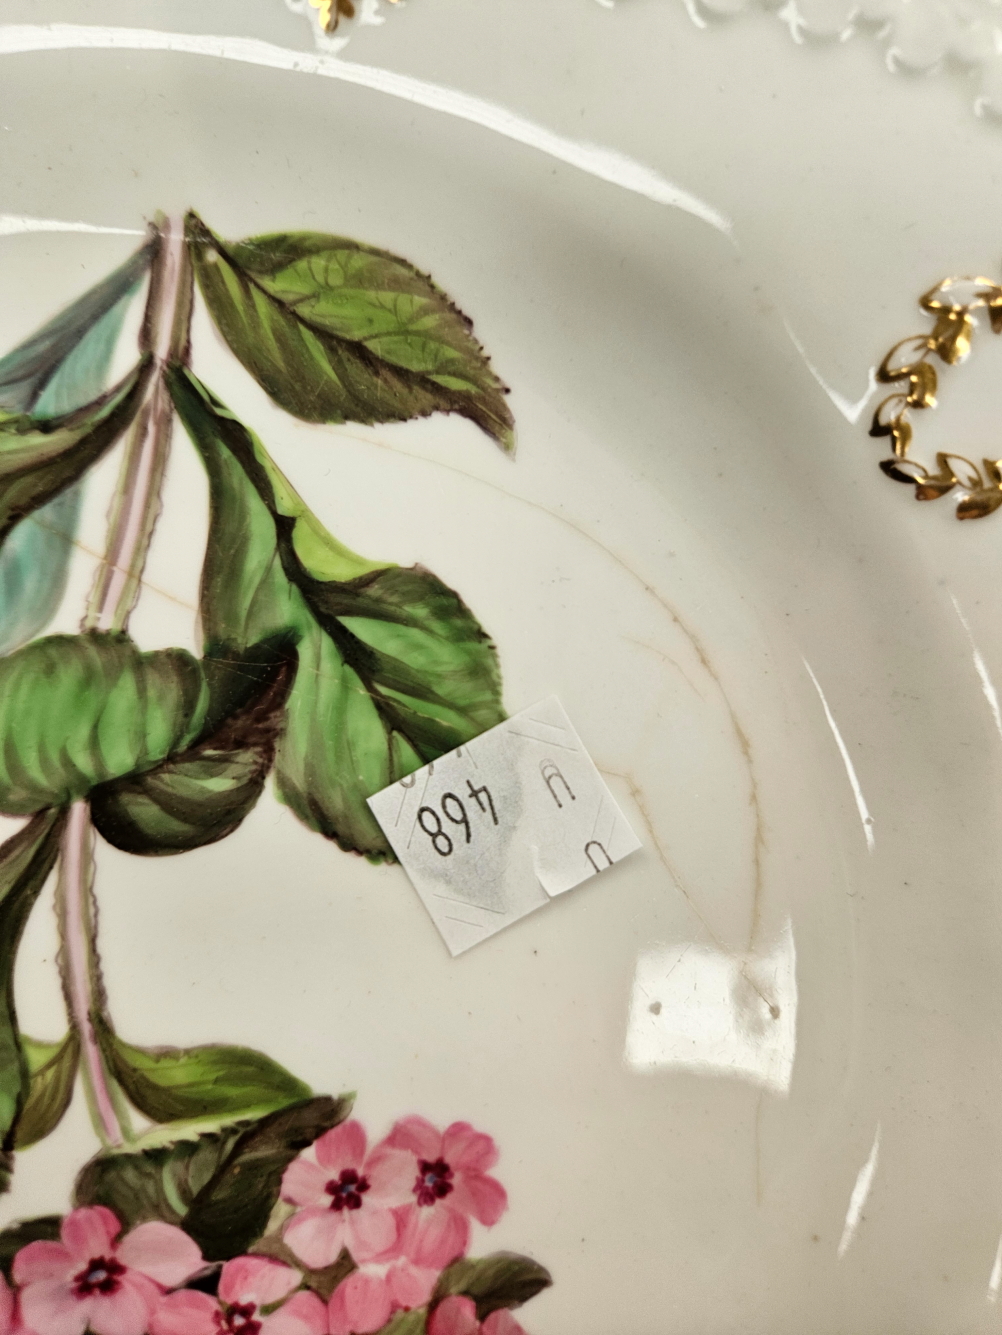 A FINE EARLY 19th C. PORCELAIN DESSERT SERVICE, HAND PAINTED WITH NAMED FLORAL BOTANICAL SPECIMENS - Image 35 of 58